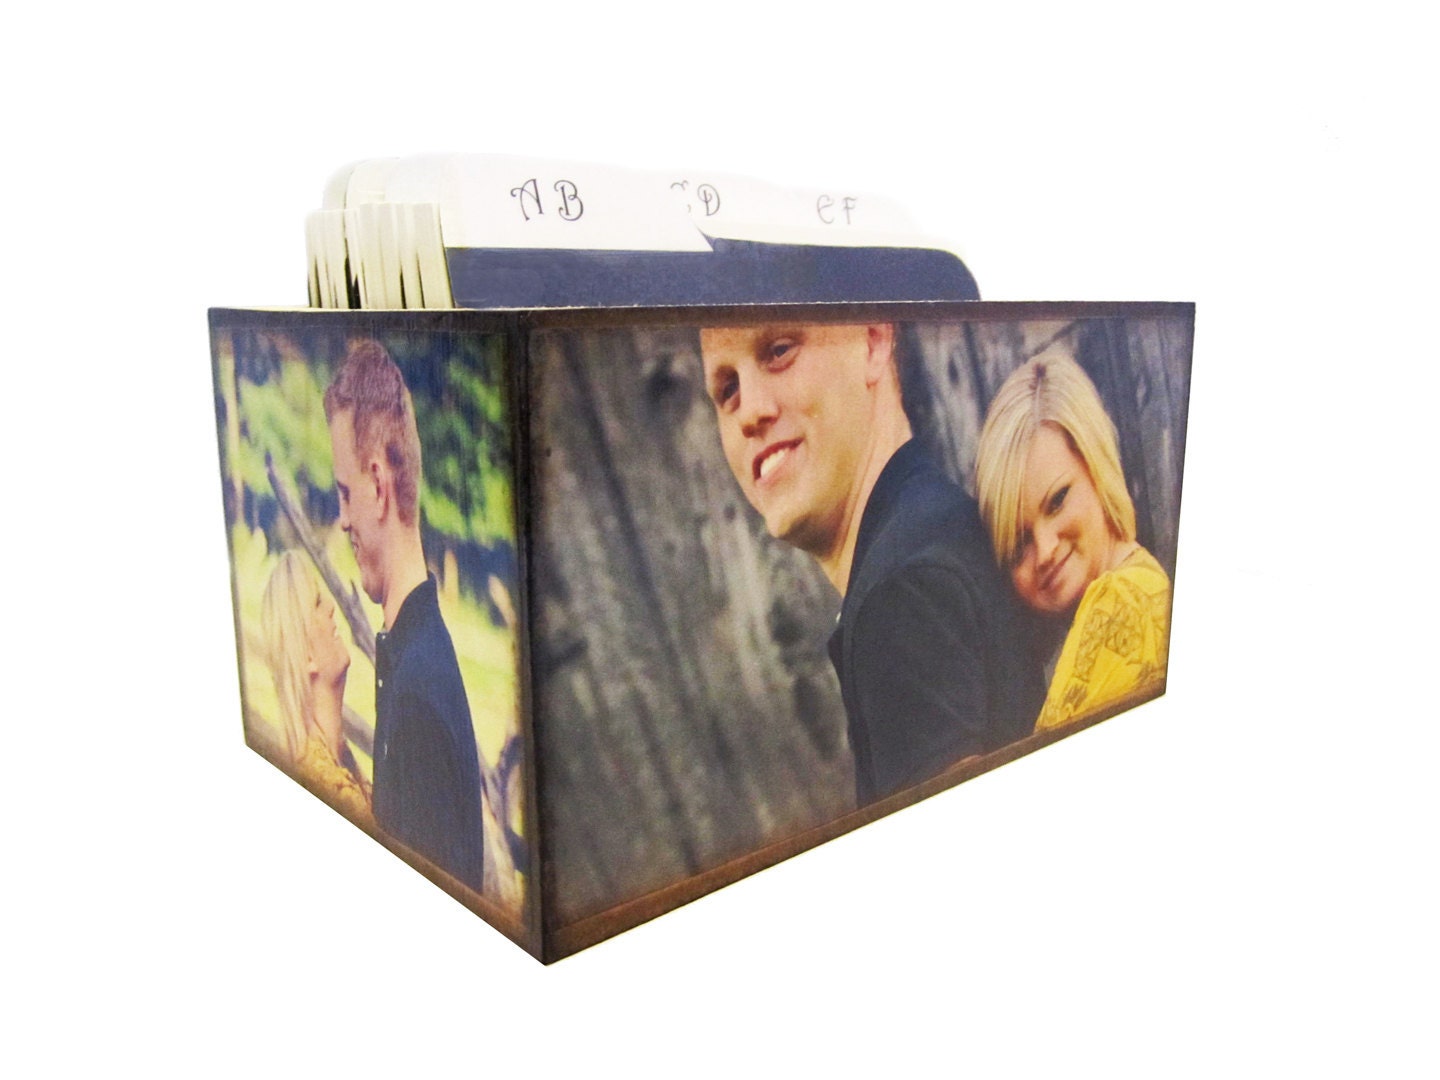 Custom Personalized Photo Wedding Guest Book Box Alternative With Dividers and 100 4x6 Guest Cards - Made to Order